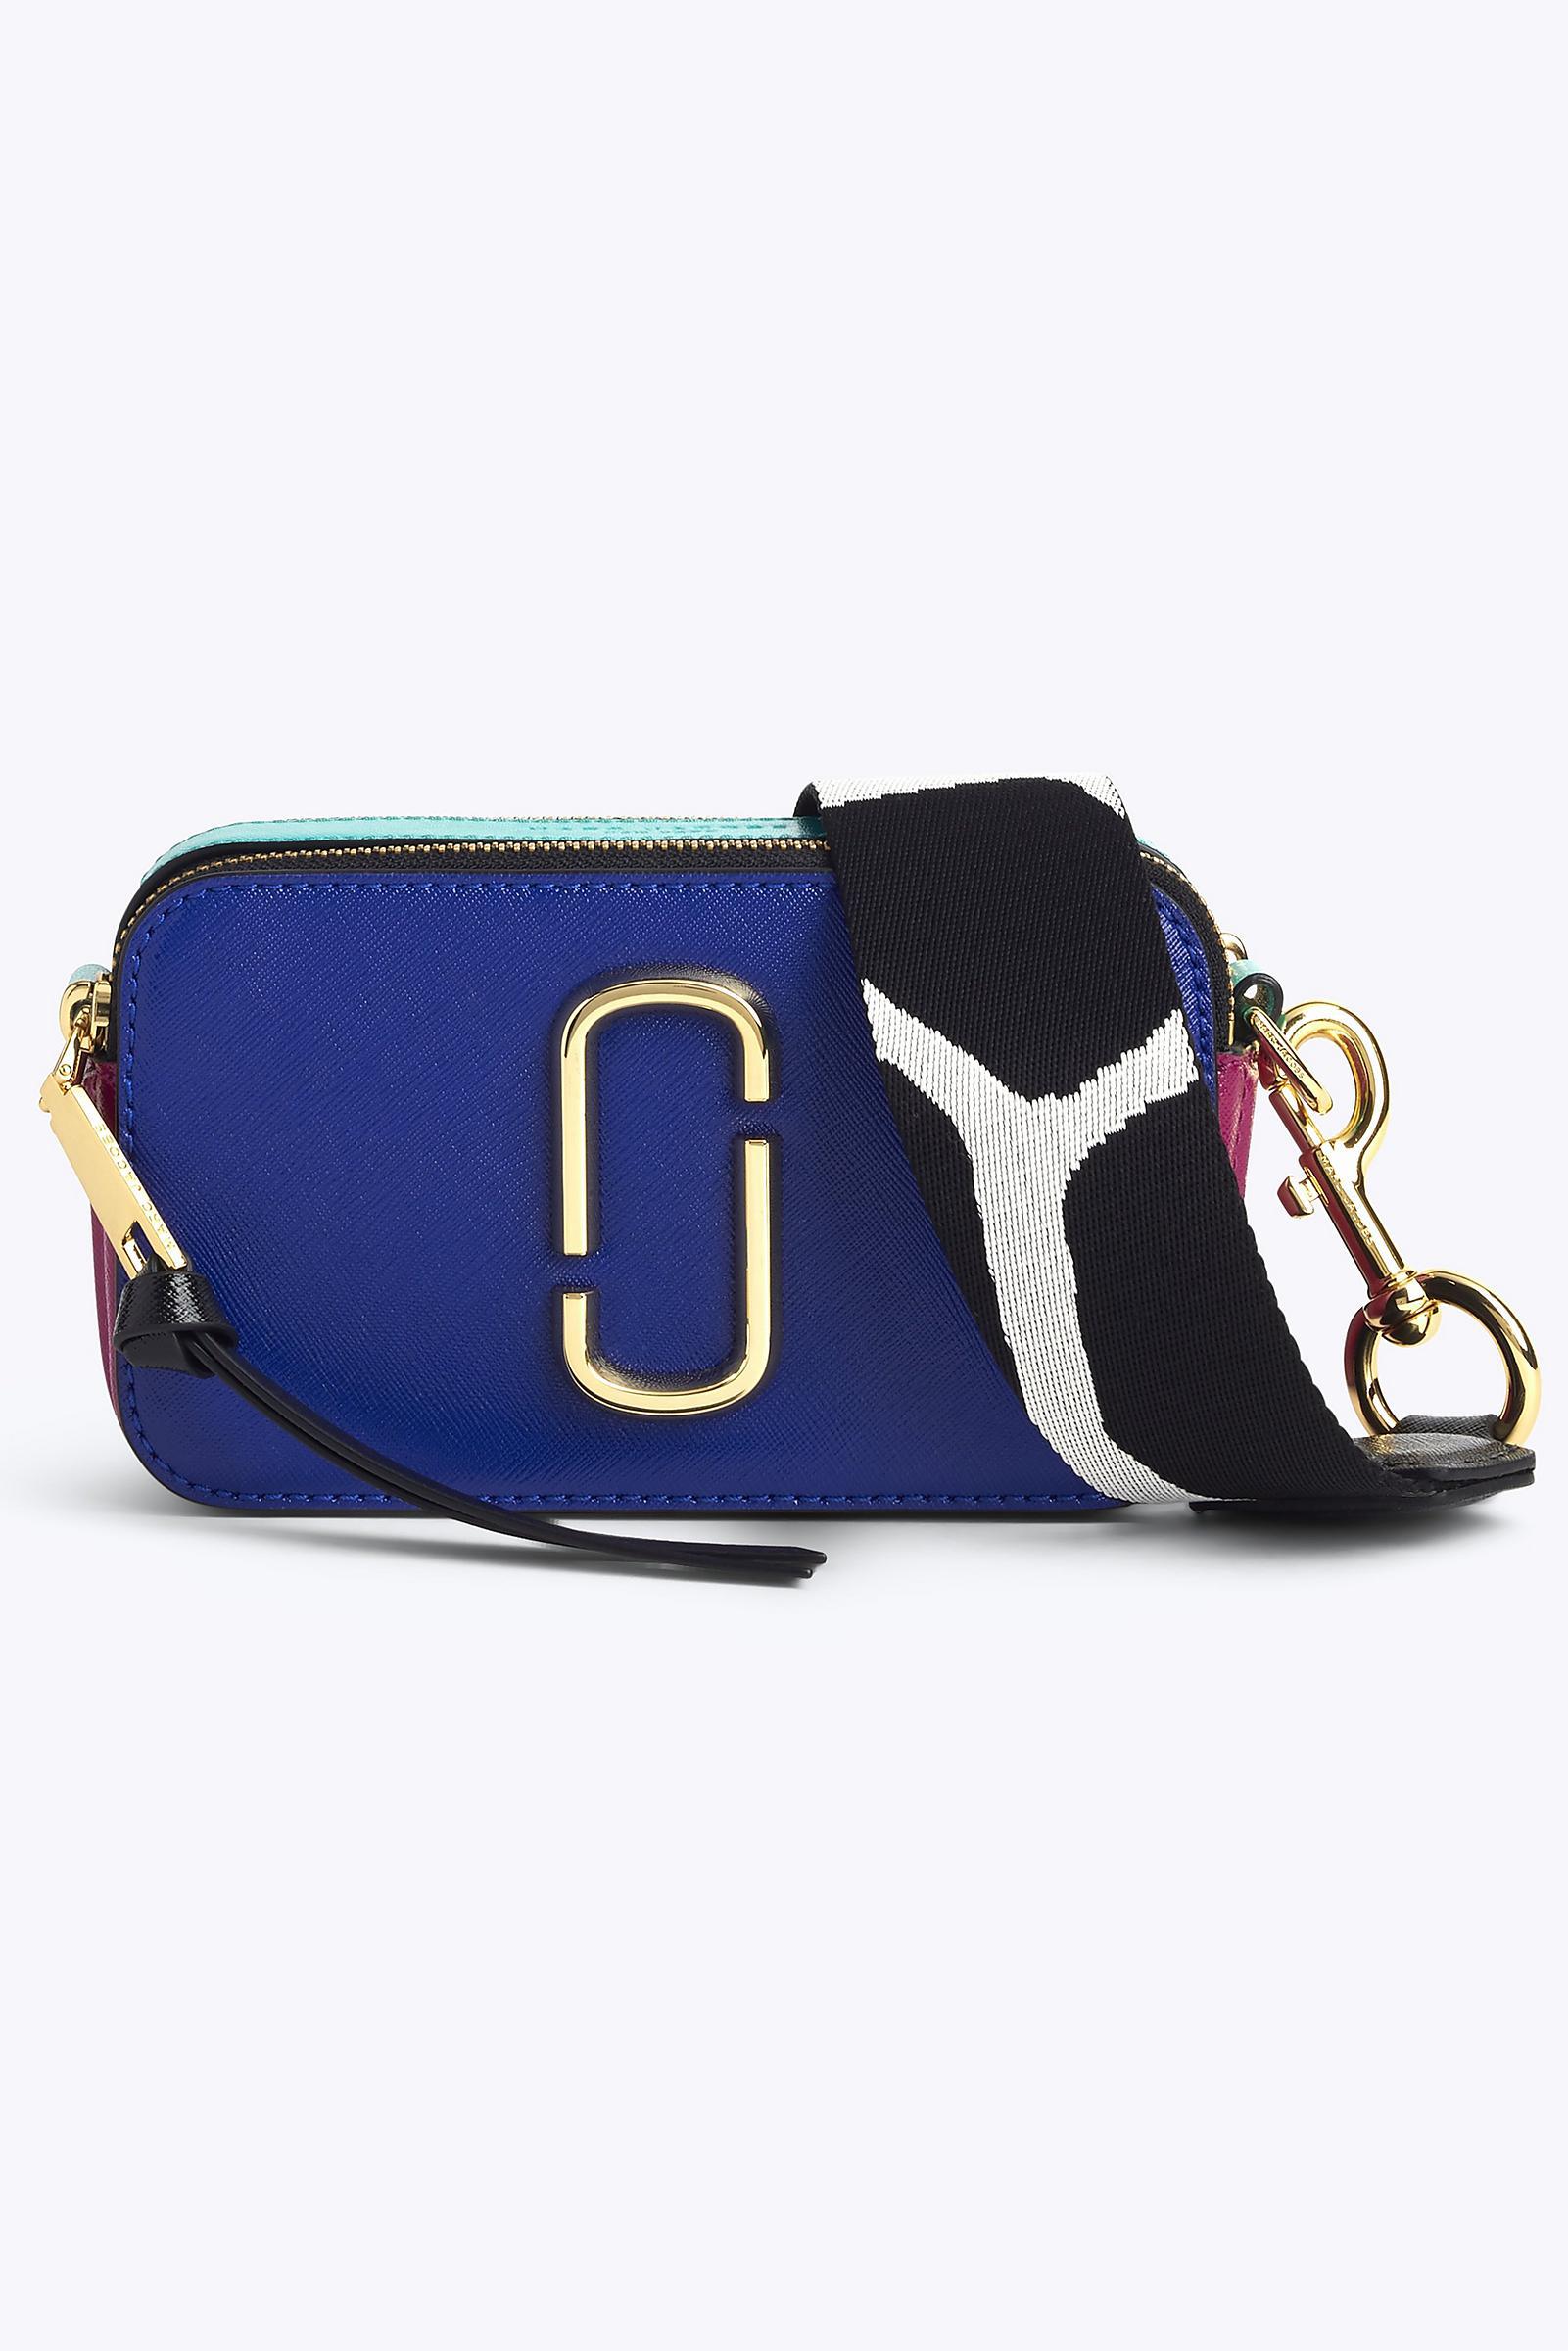 Marc Jacobs Snapshot Small Camera Bag in Academy Blue